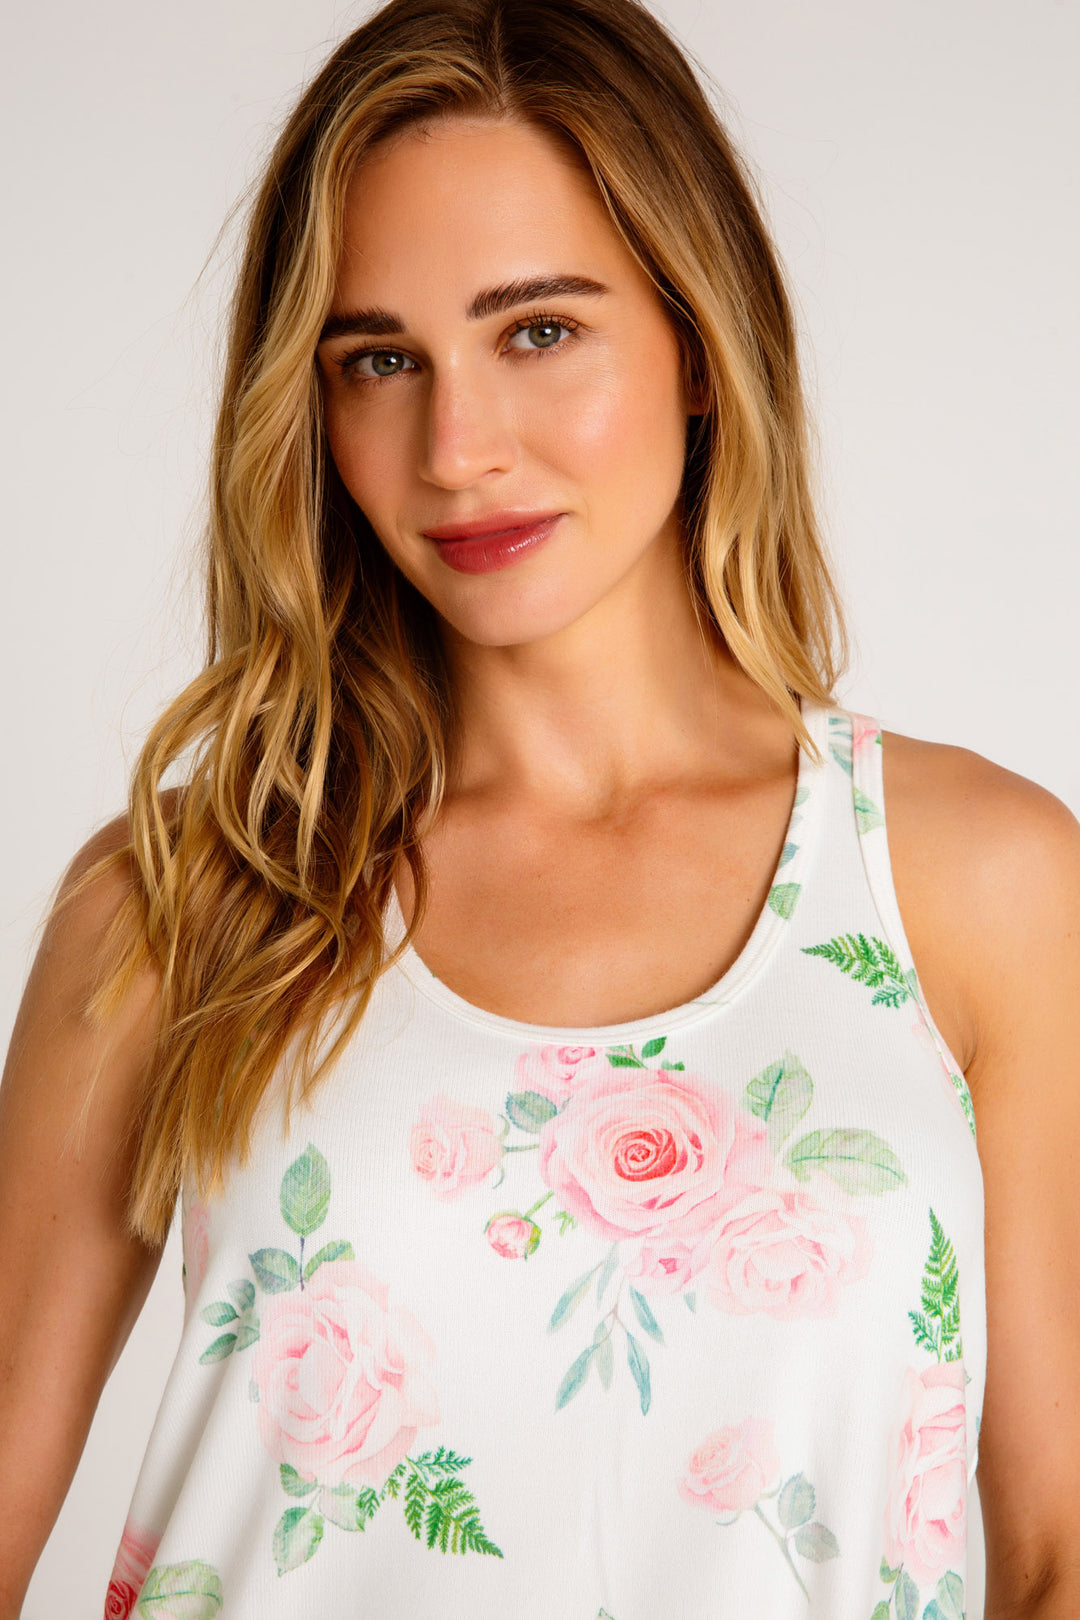 Sleep tank top in ivory-pink rose-floral printed peachy knit. Relaxed fit with racer back. (7325666410596)